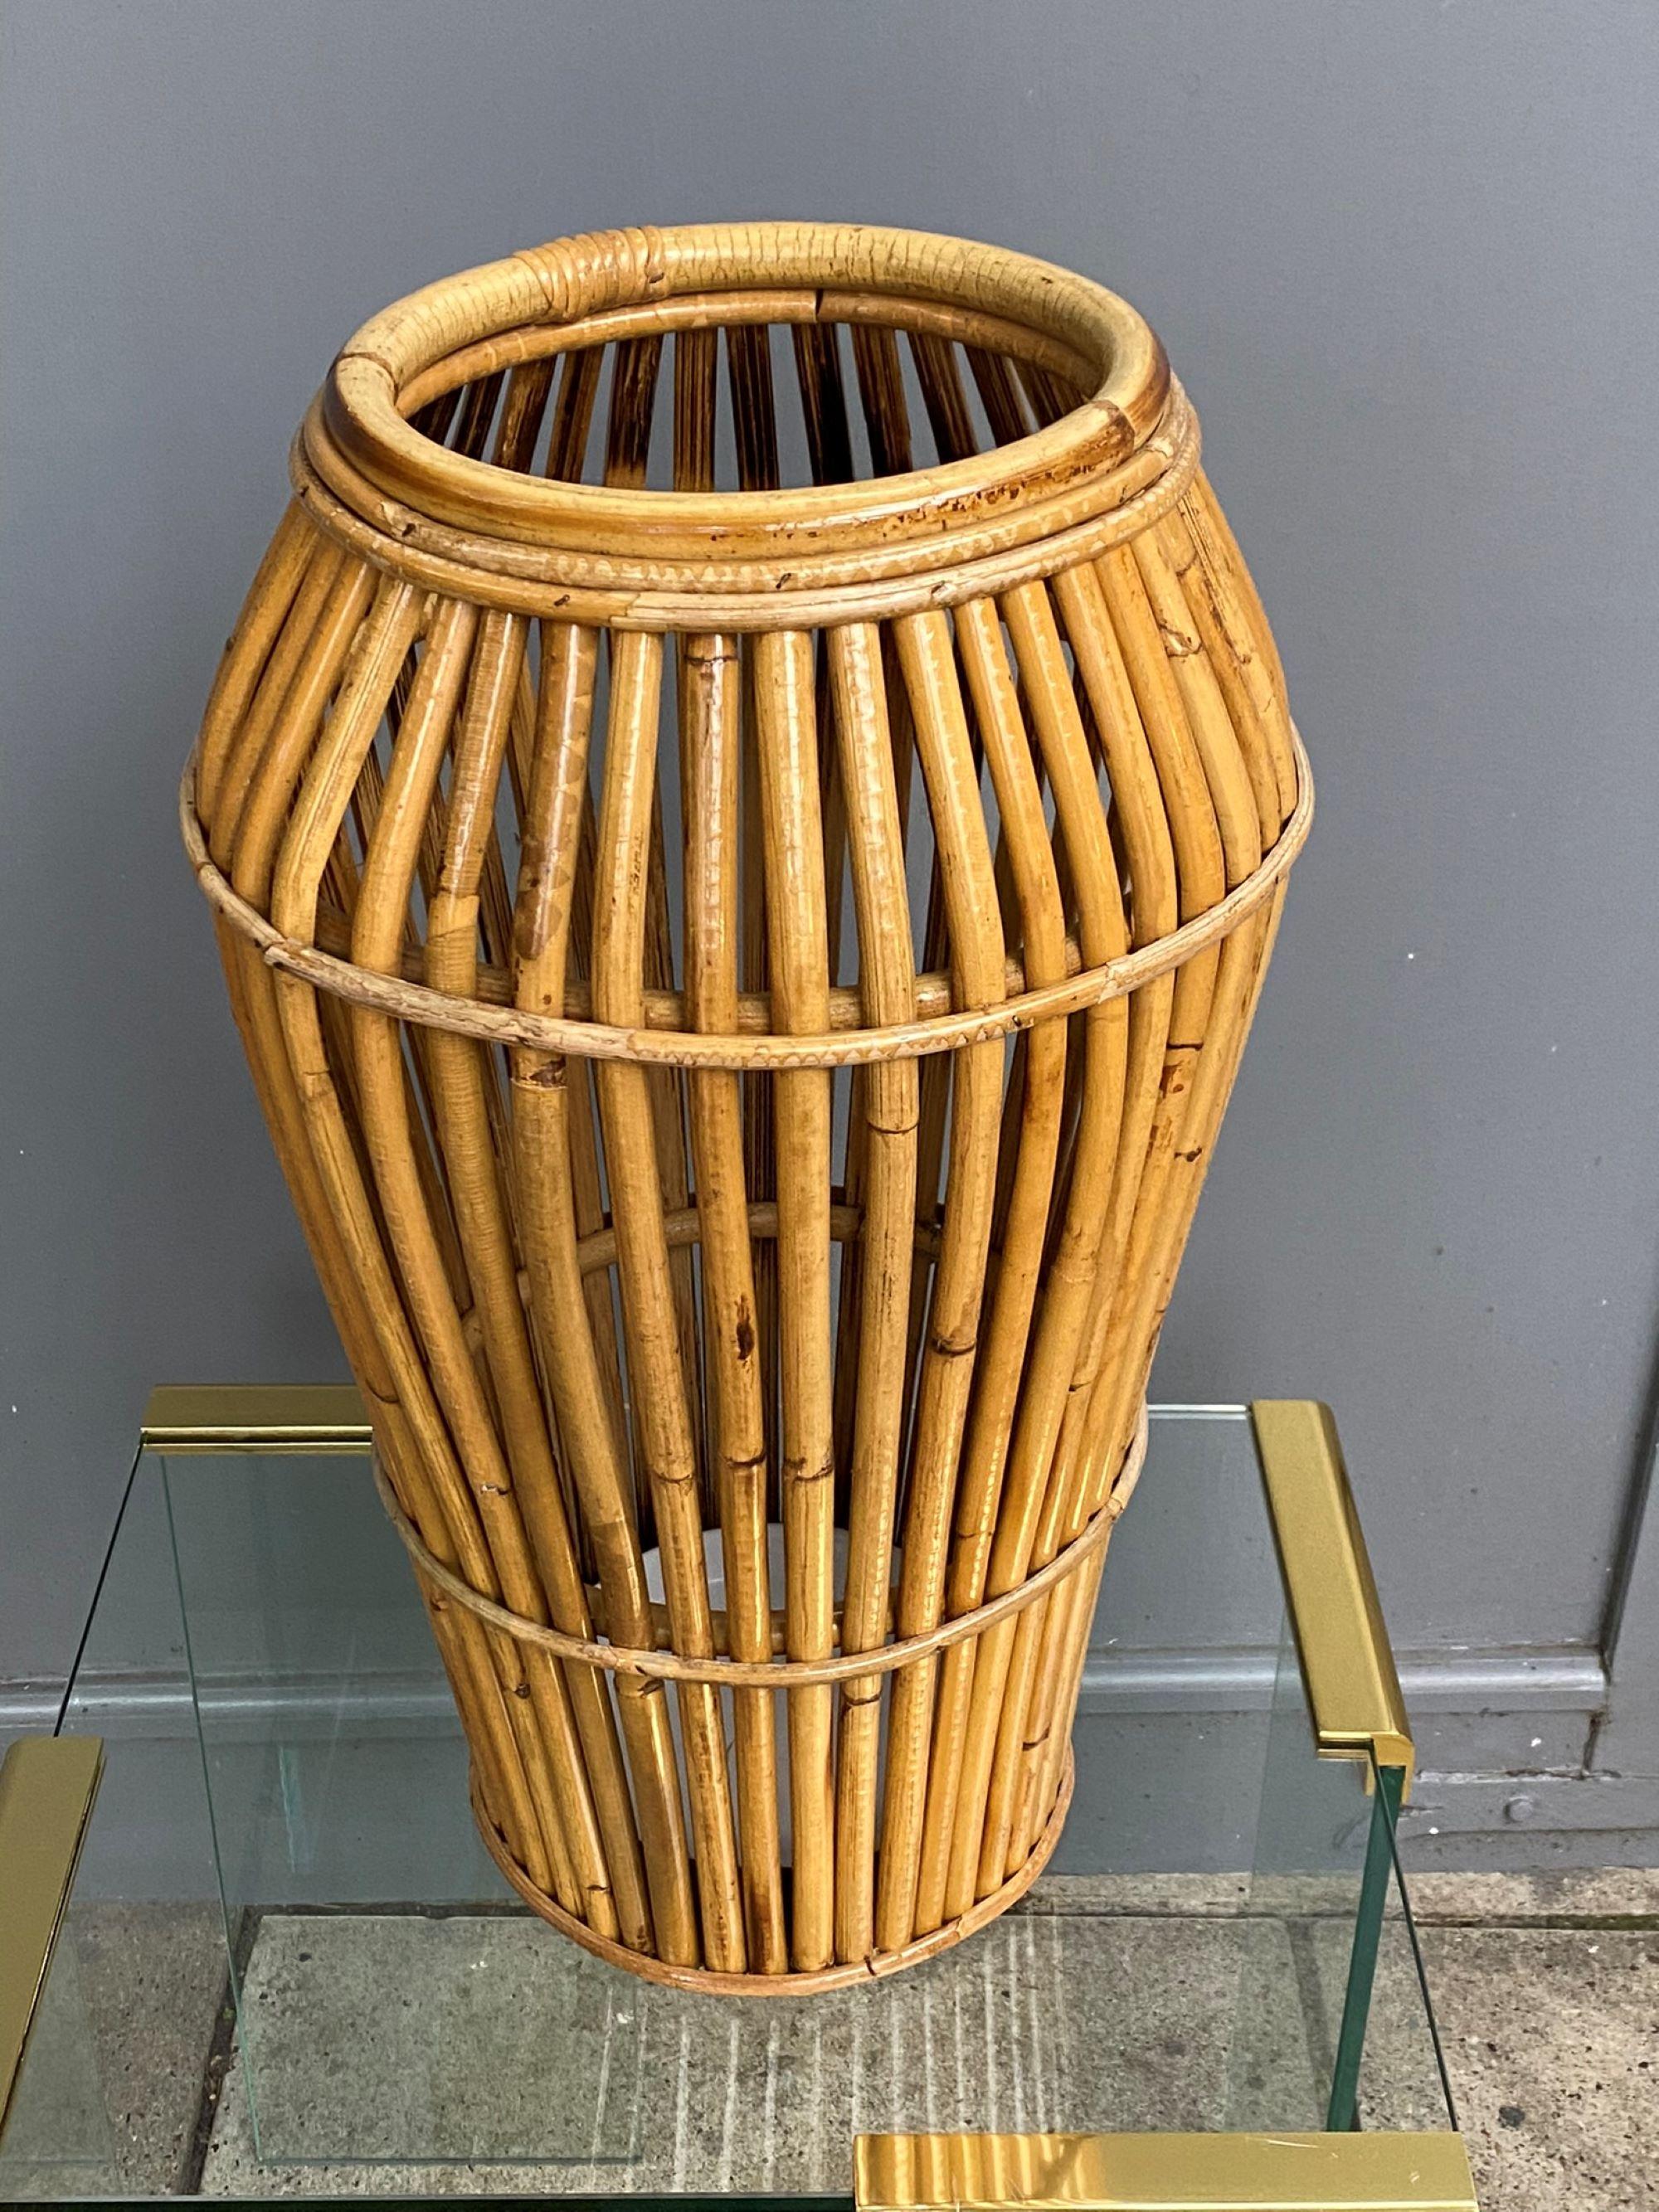 Italian Bamboo Umbrella Stand / Cane Stand Attributed to Franco Albini for Vittorio Bonacina, 1970s

Beautiful Italian bamboo umbrella stand attributed to Franco Albini for Vittorio Bonacina. Wonderful colour and patina. With metal drip tray